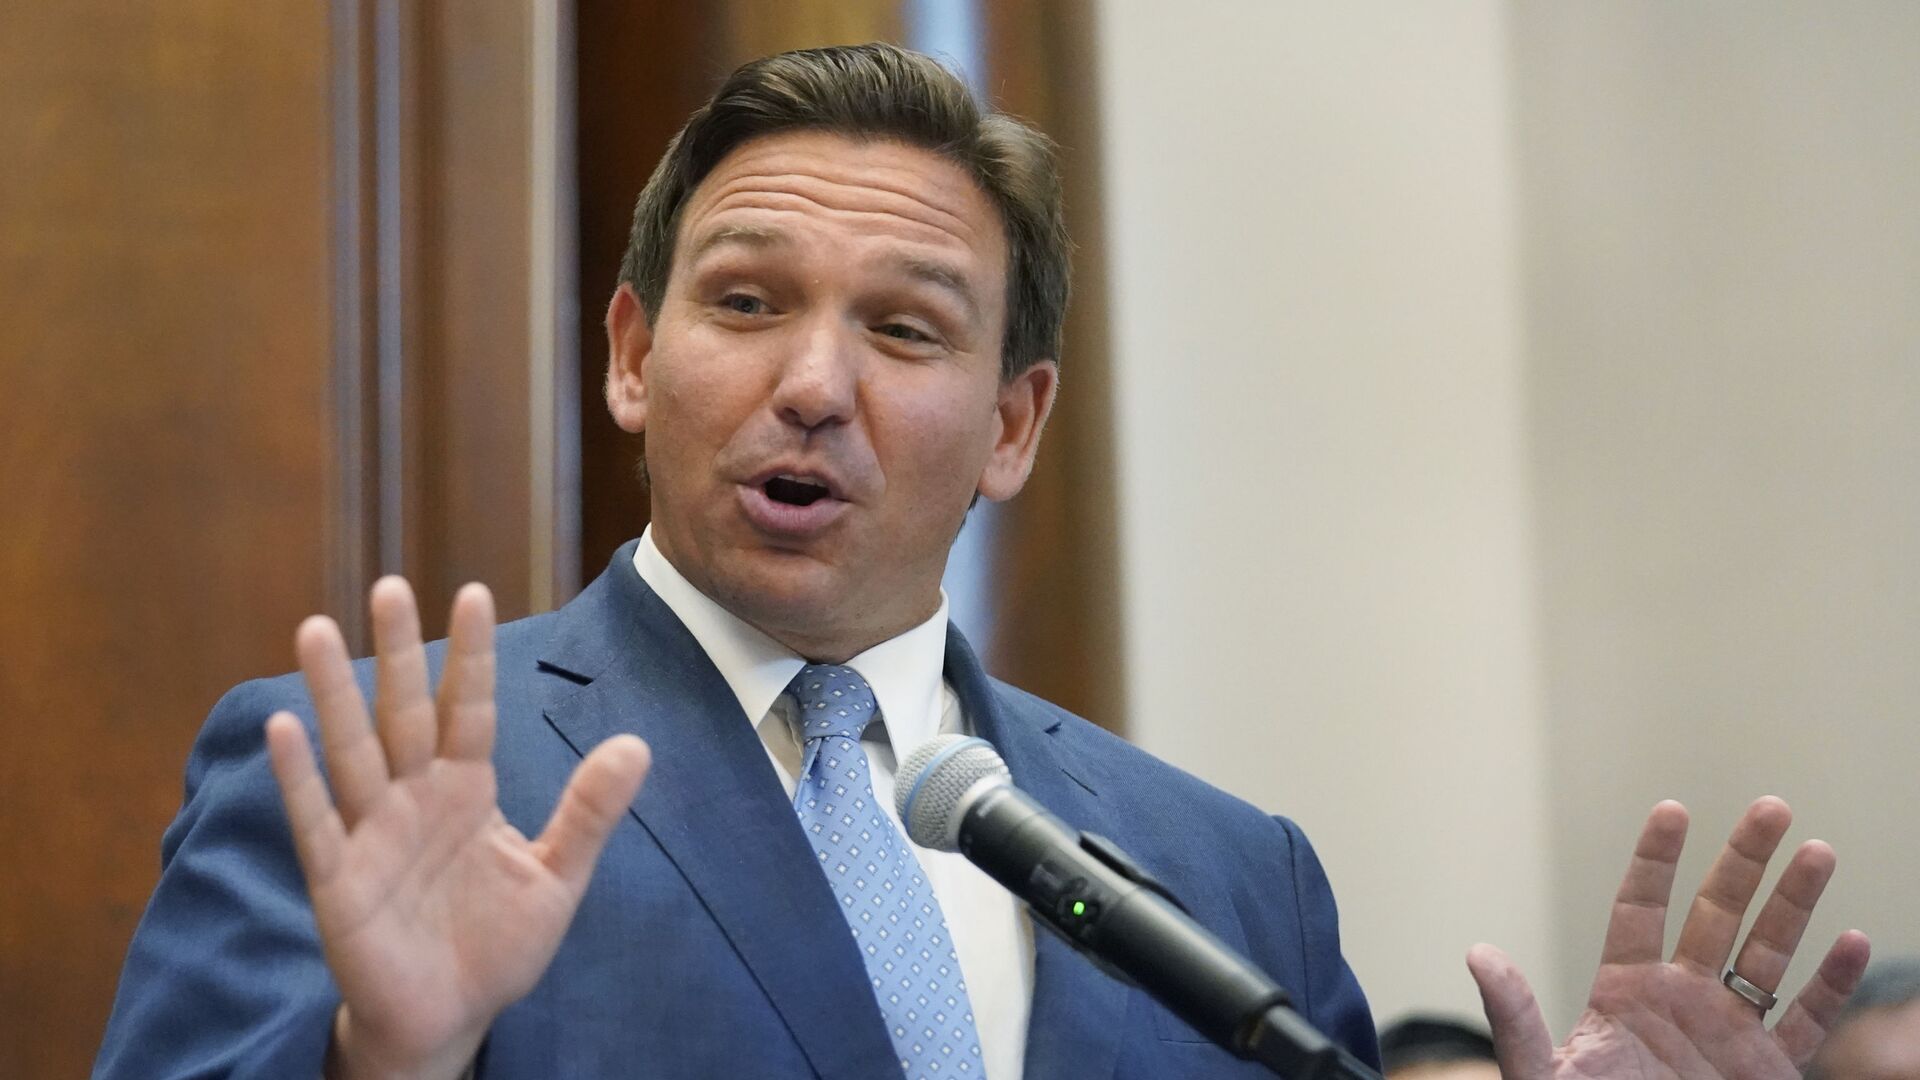 Florida Gov. Ron DeSantis gestures as he speaks, Monday, June 14, 2021, at the Shul of Bal Harbour, a Jewish community center in Surfside, Fla. DeSantis visited the South Florida temple to denounce anti-Semitism and stand with Israel, while signing a bill into law that would require public schools in his state to set aside moments of silence for children to meditate or pray - Sputnik International, 1920, 25.10.2021